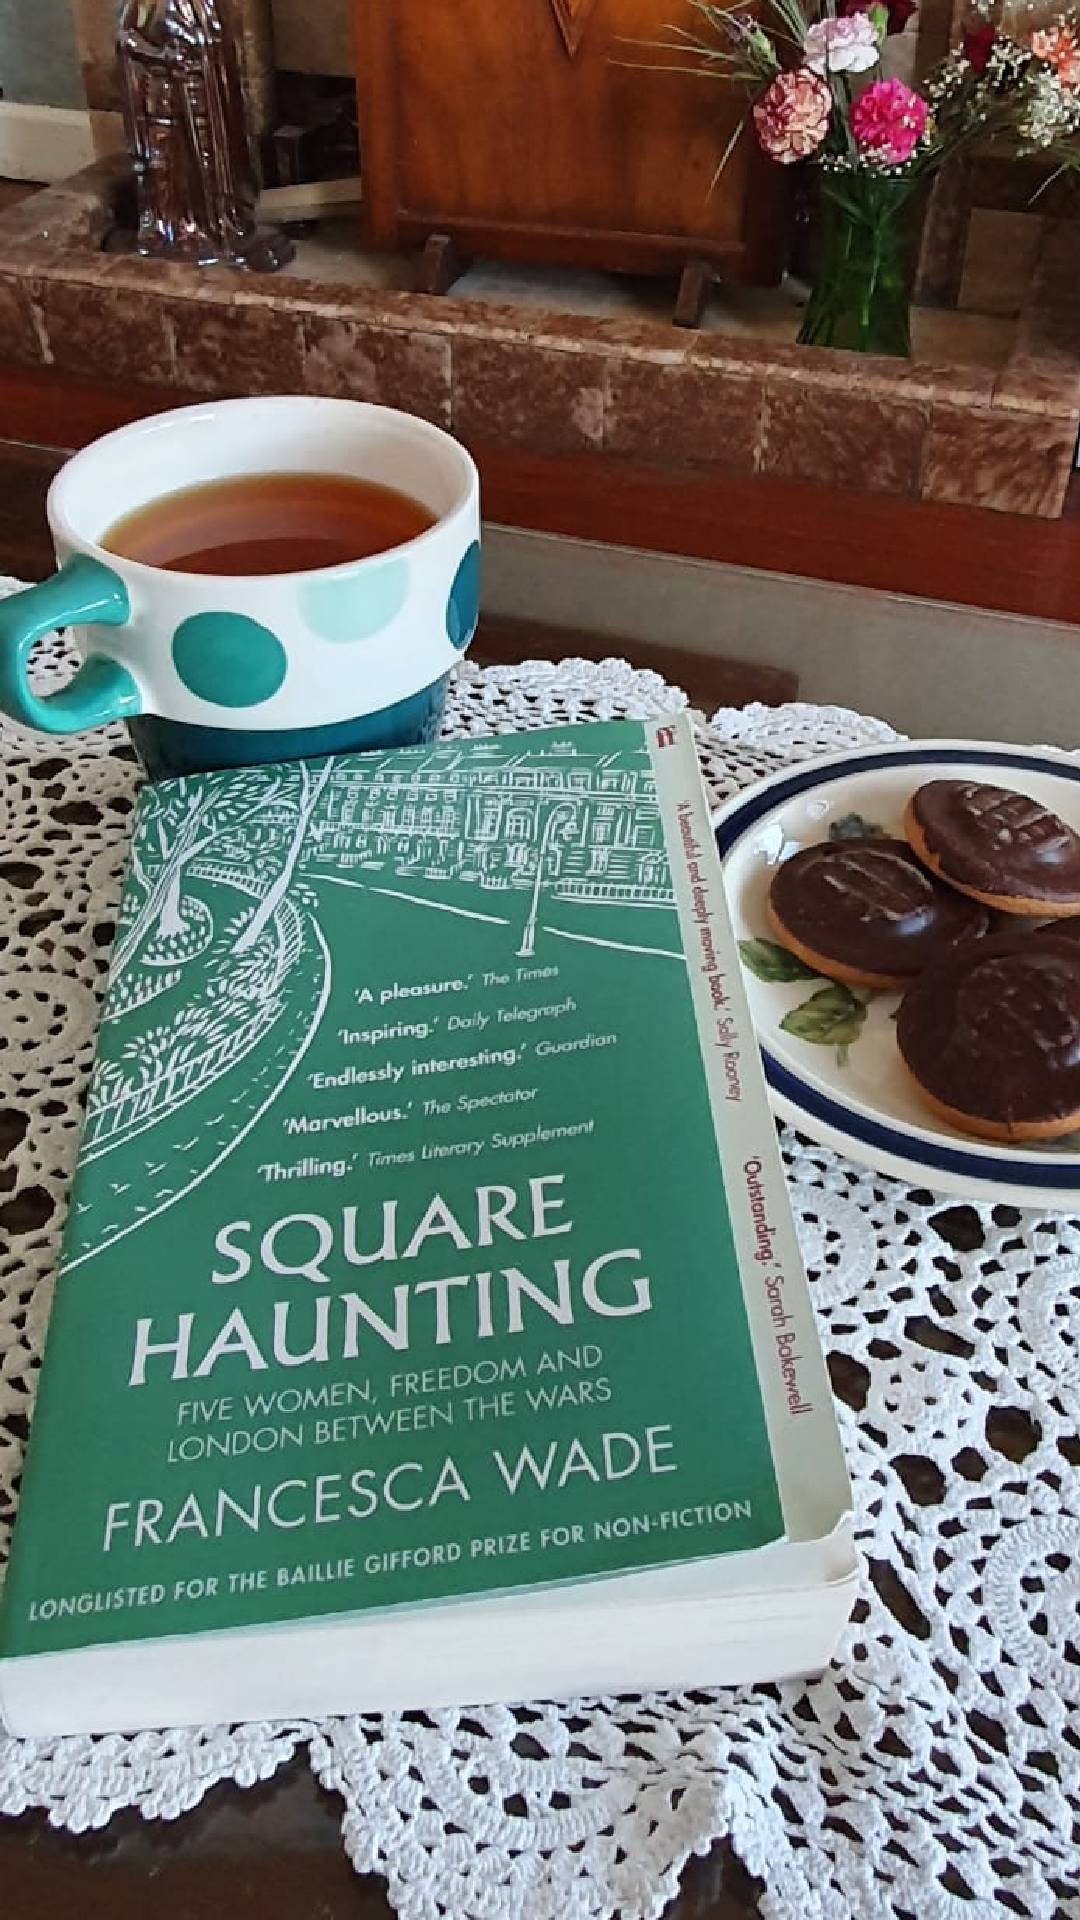 A copy of Square Haunting, with a cup of tea and jaffa cakes